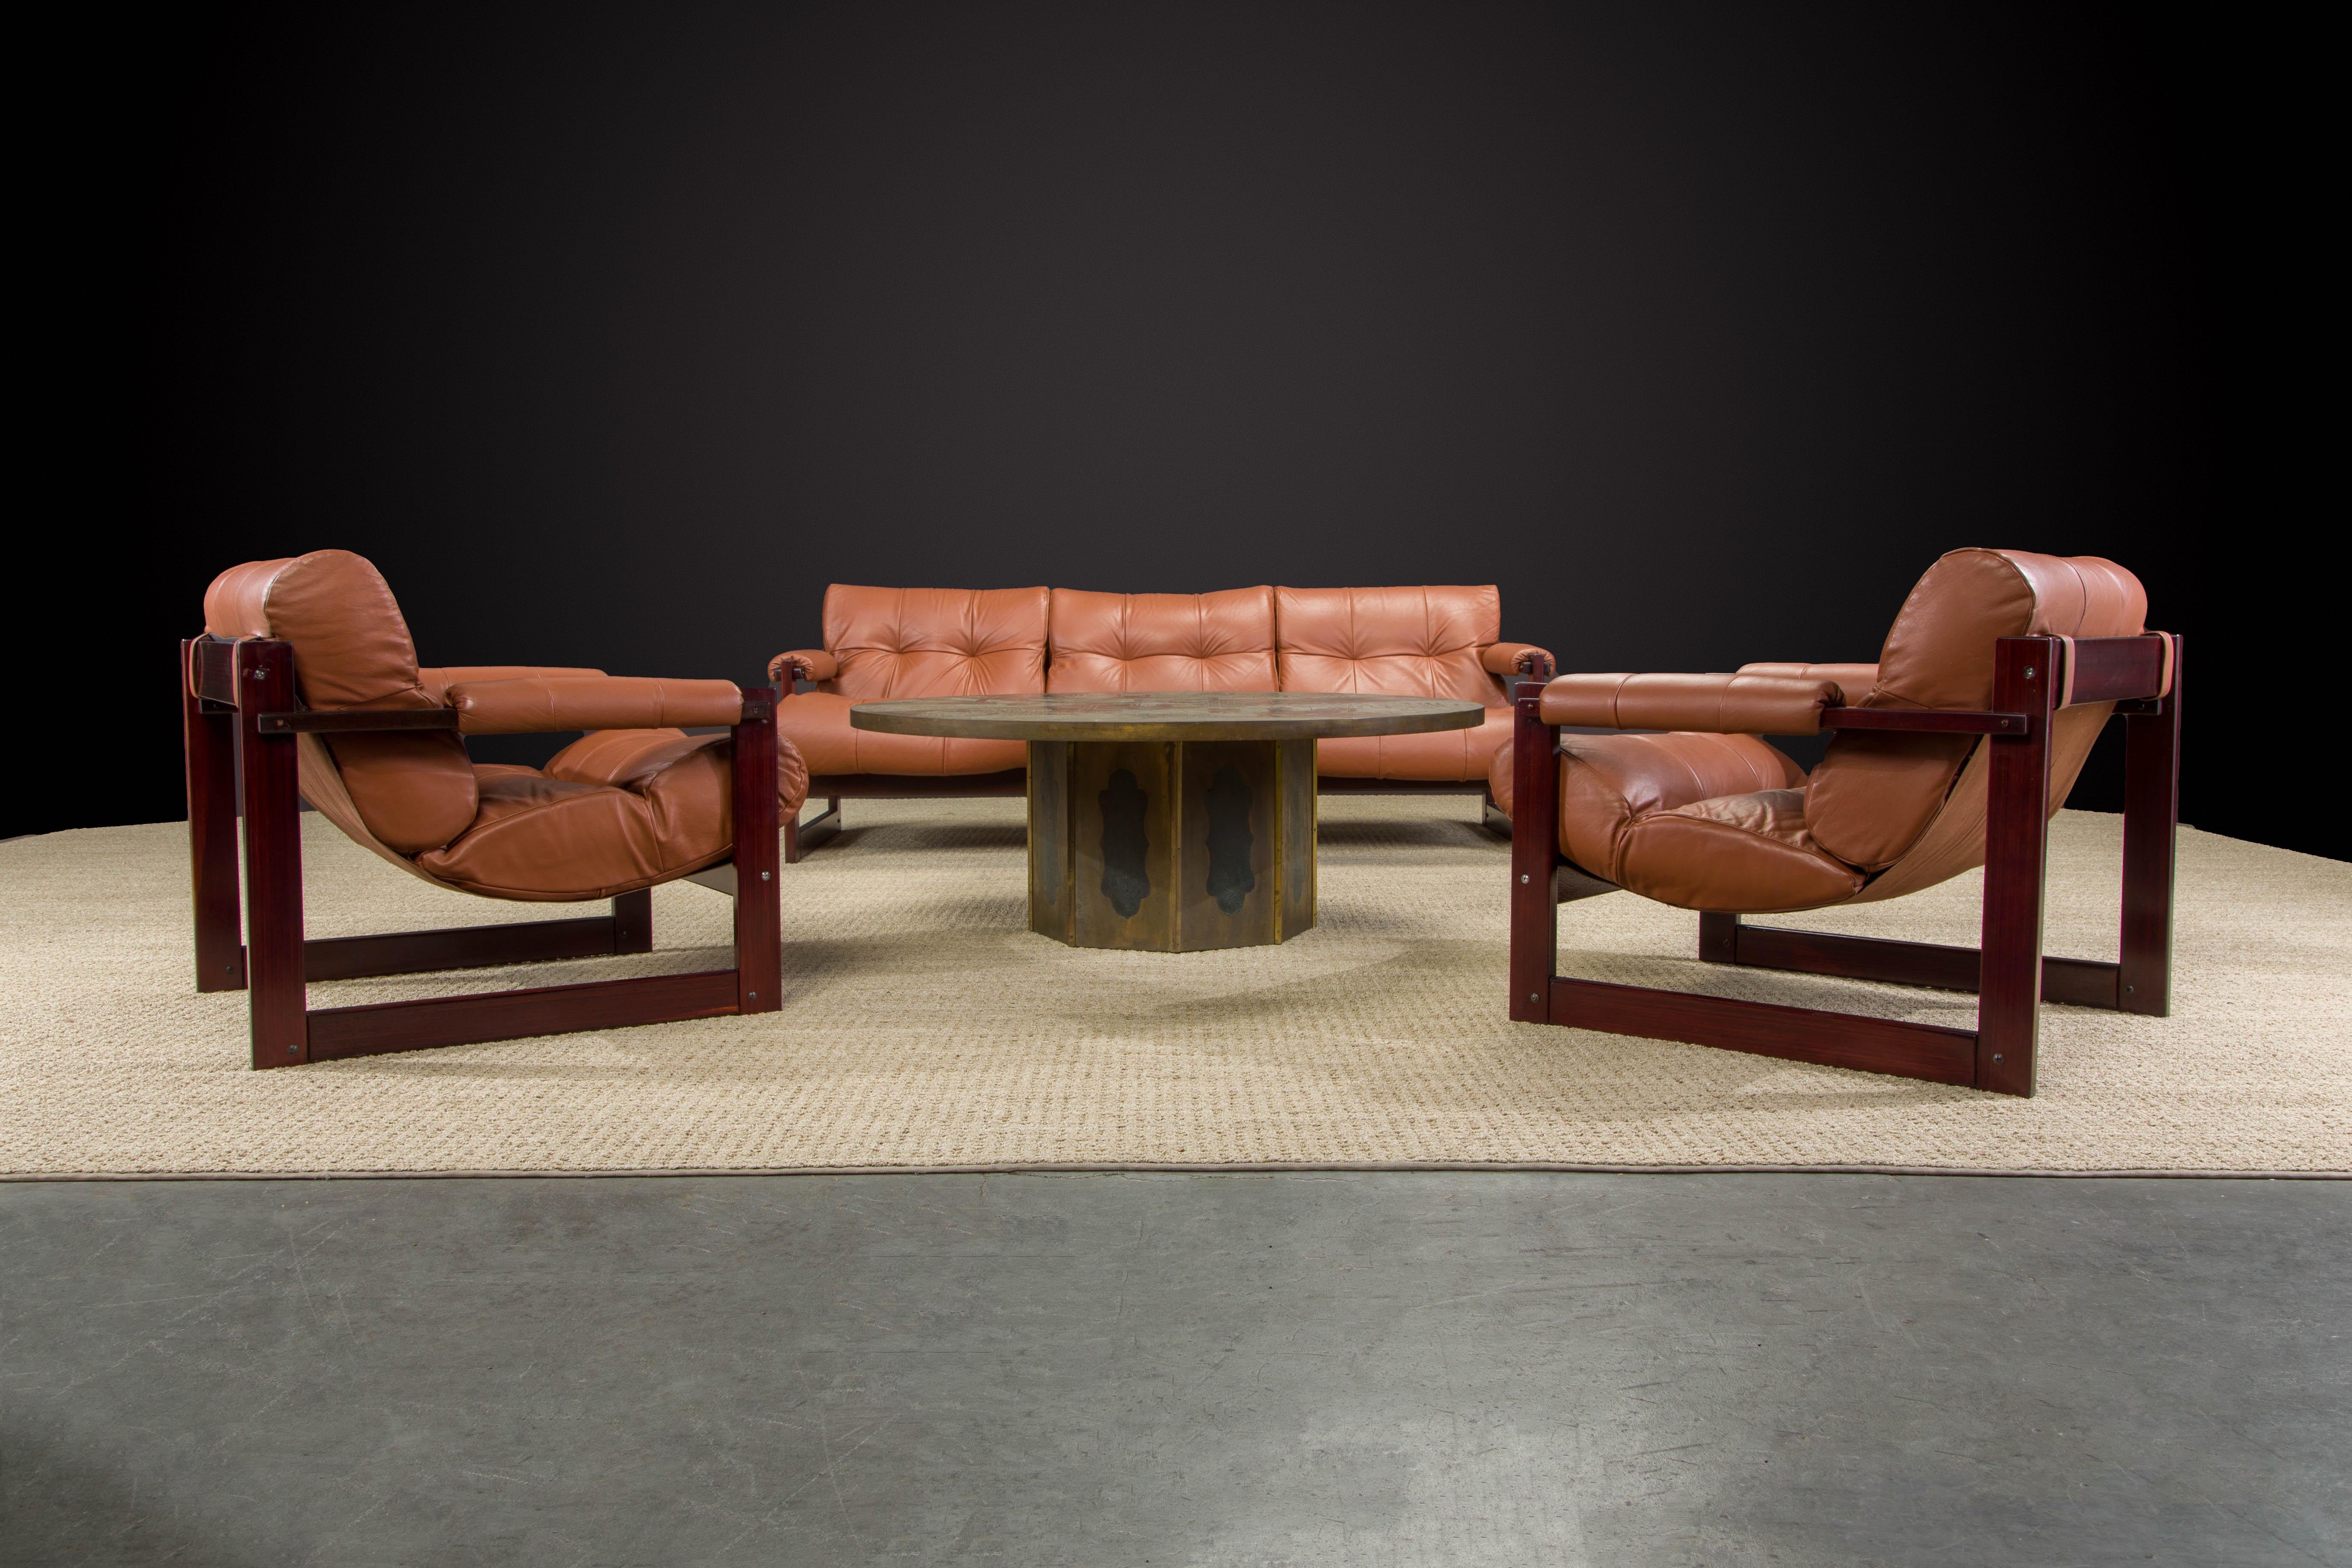 Percival Lafer 'S-1' Rosewood and Leather Lounge Chairs, Brazil, 1976, Signed For Sale 10